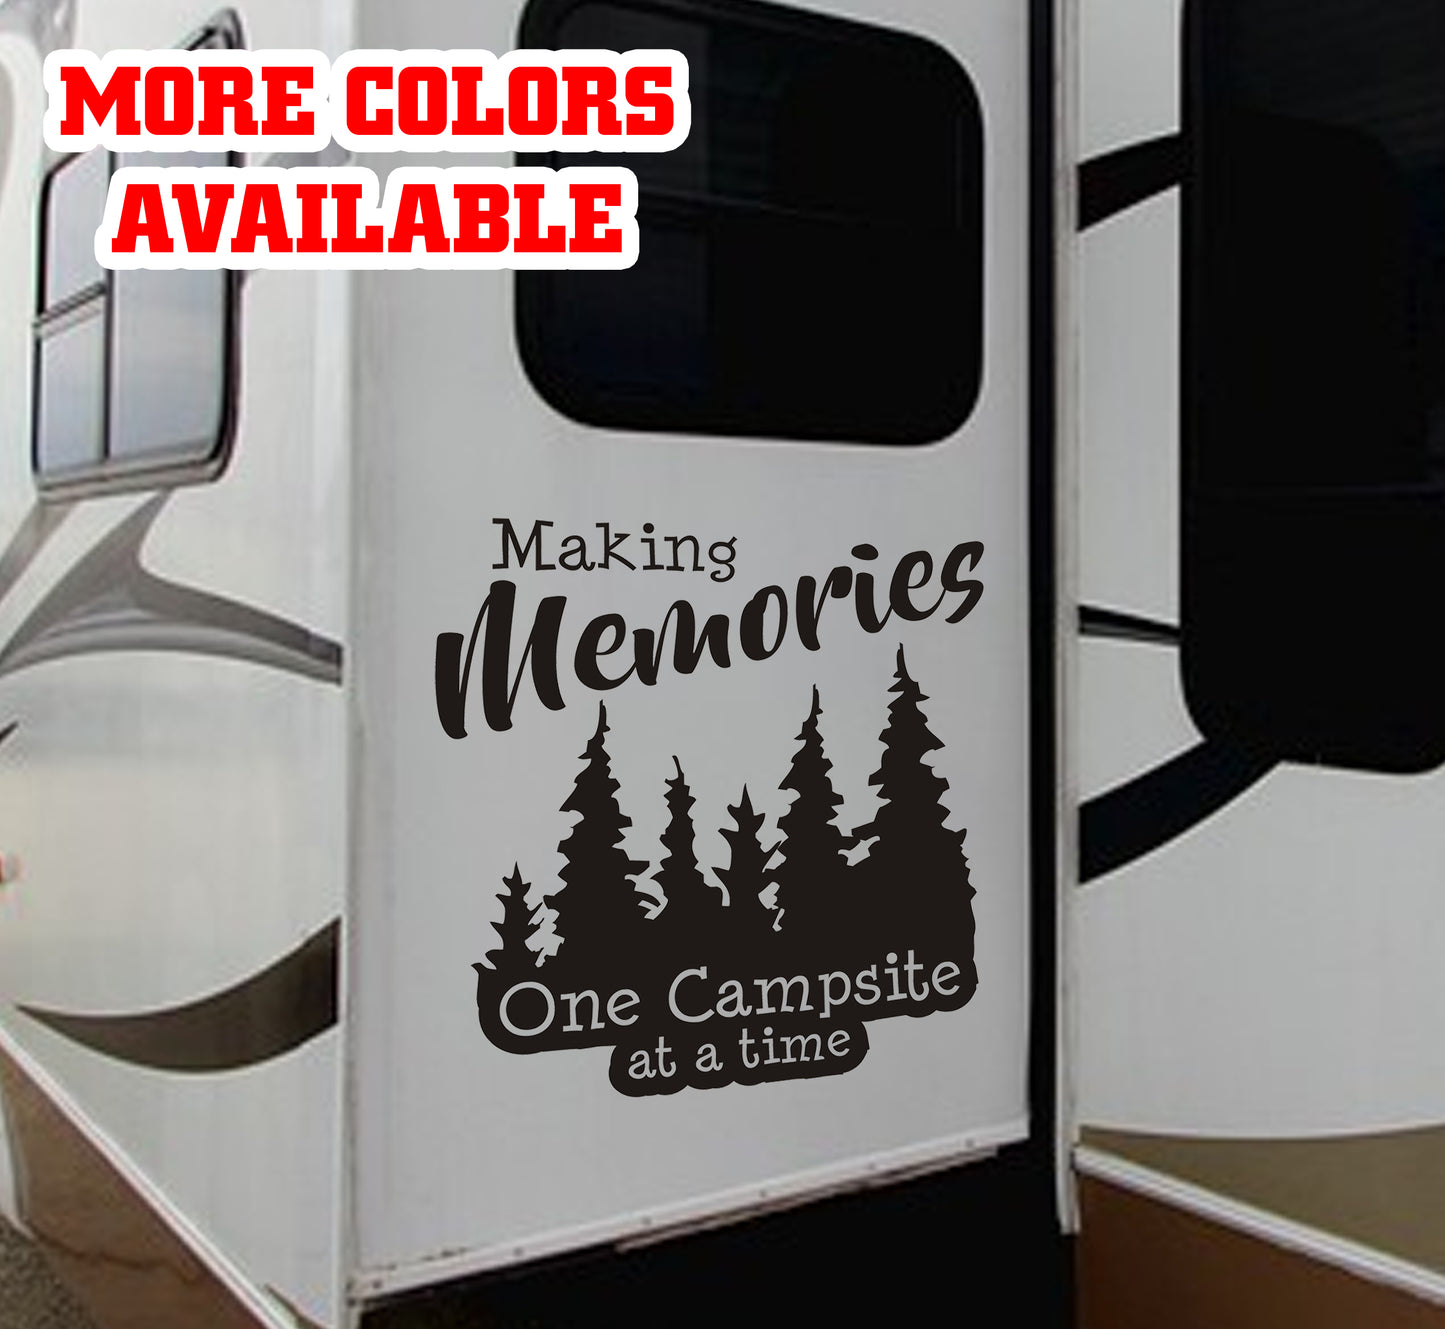 Making Memories one Campsite at a time Vinyl Sticker Decal Graphic | RV Slide Decal RV Door Decal Travel Trailer Camper